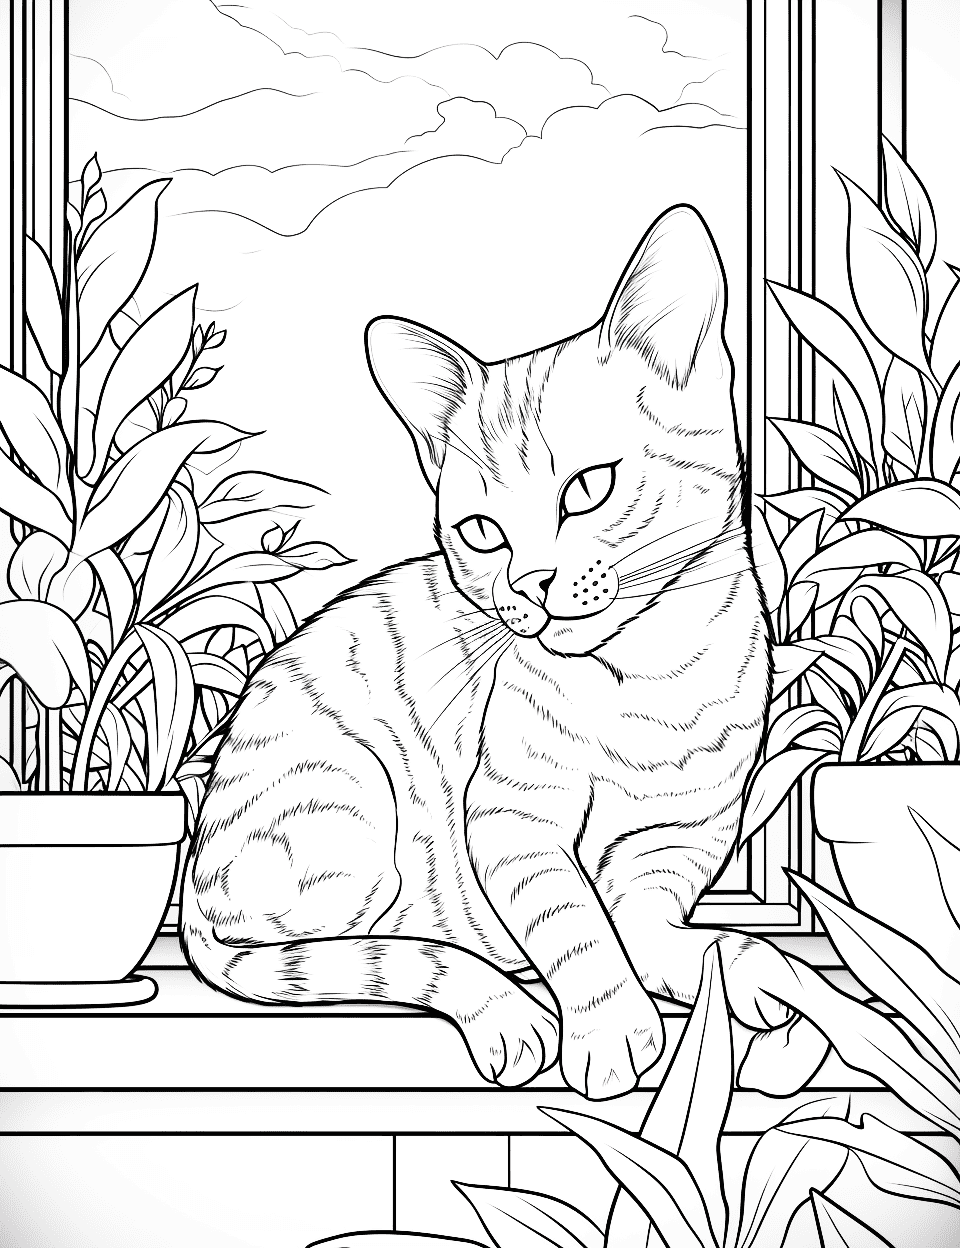 Cat's Windowsill Rest Adult Coloring Page - A cat curled up on a windowsill with a potted plant.